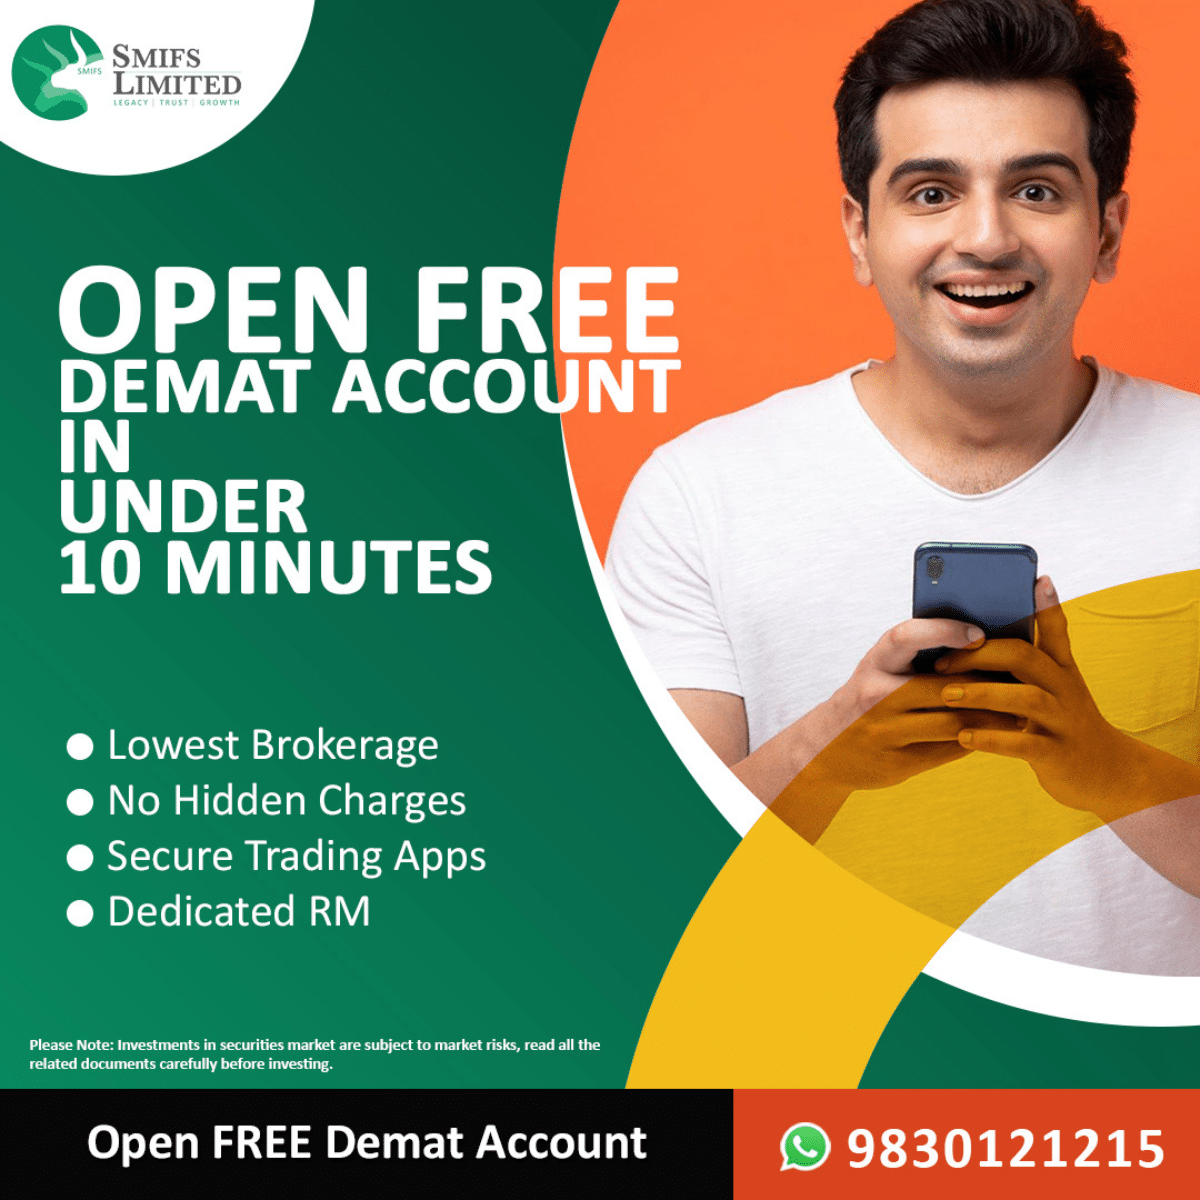 Open Free Demat & Trading Account with SMIFS Limited - - sebi registered stock brokers in kolkata,